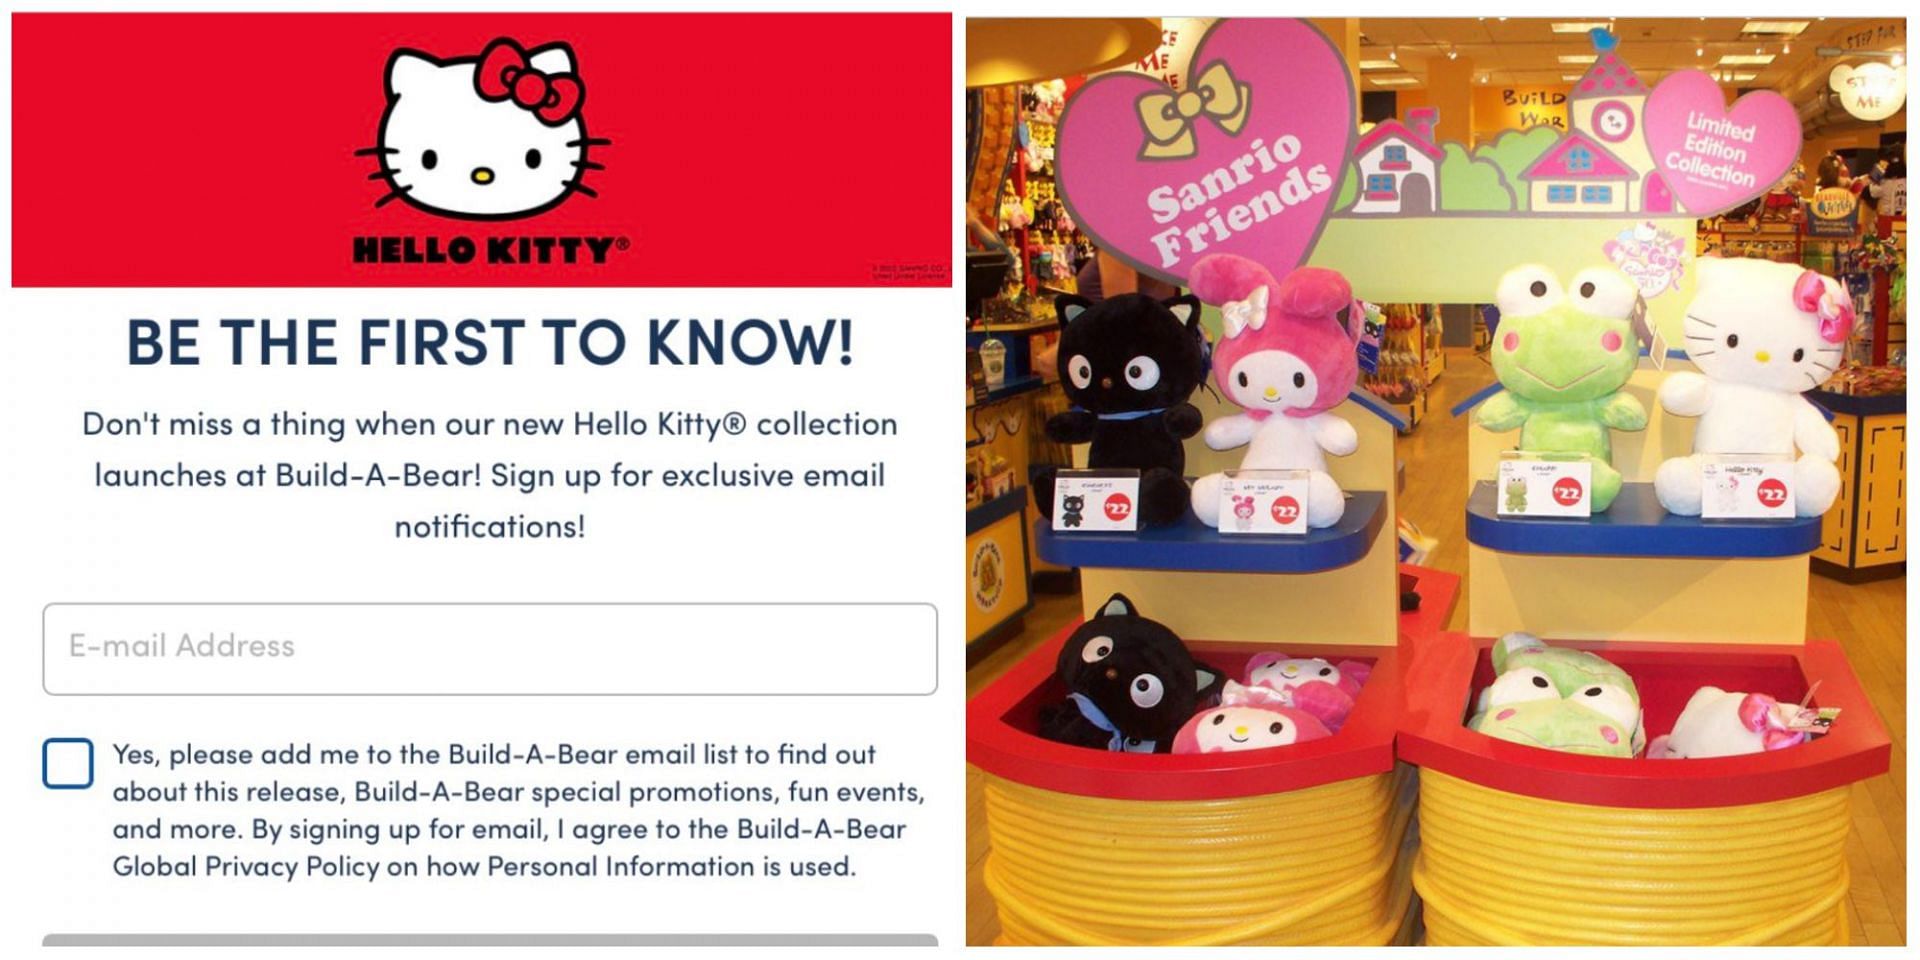 Is the new Hello Kitty collection by Build A Bear related to the Hong Kong